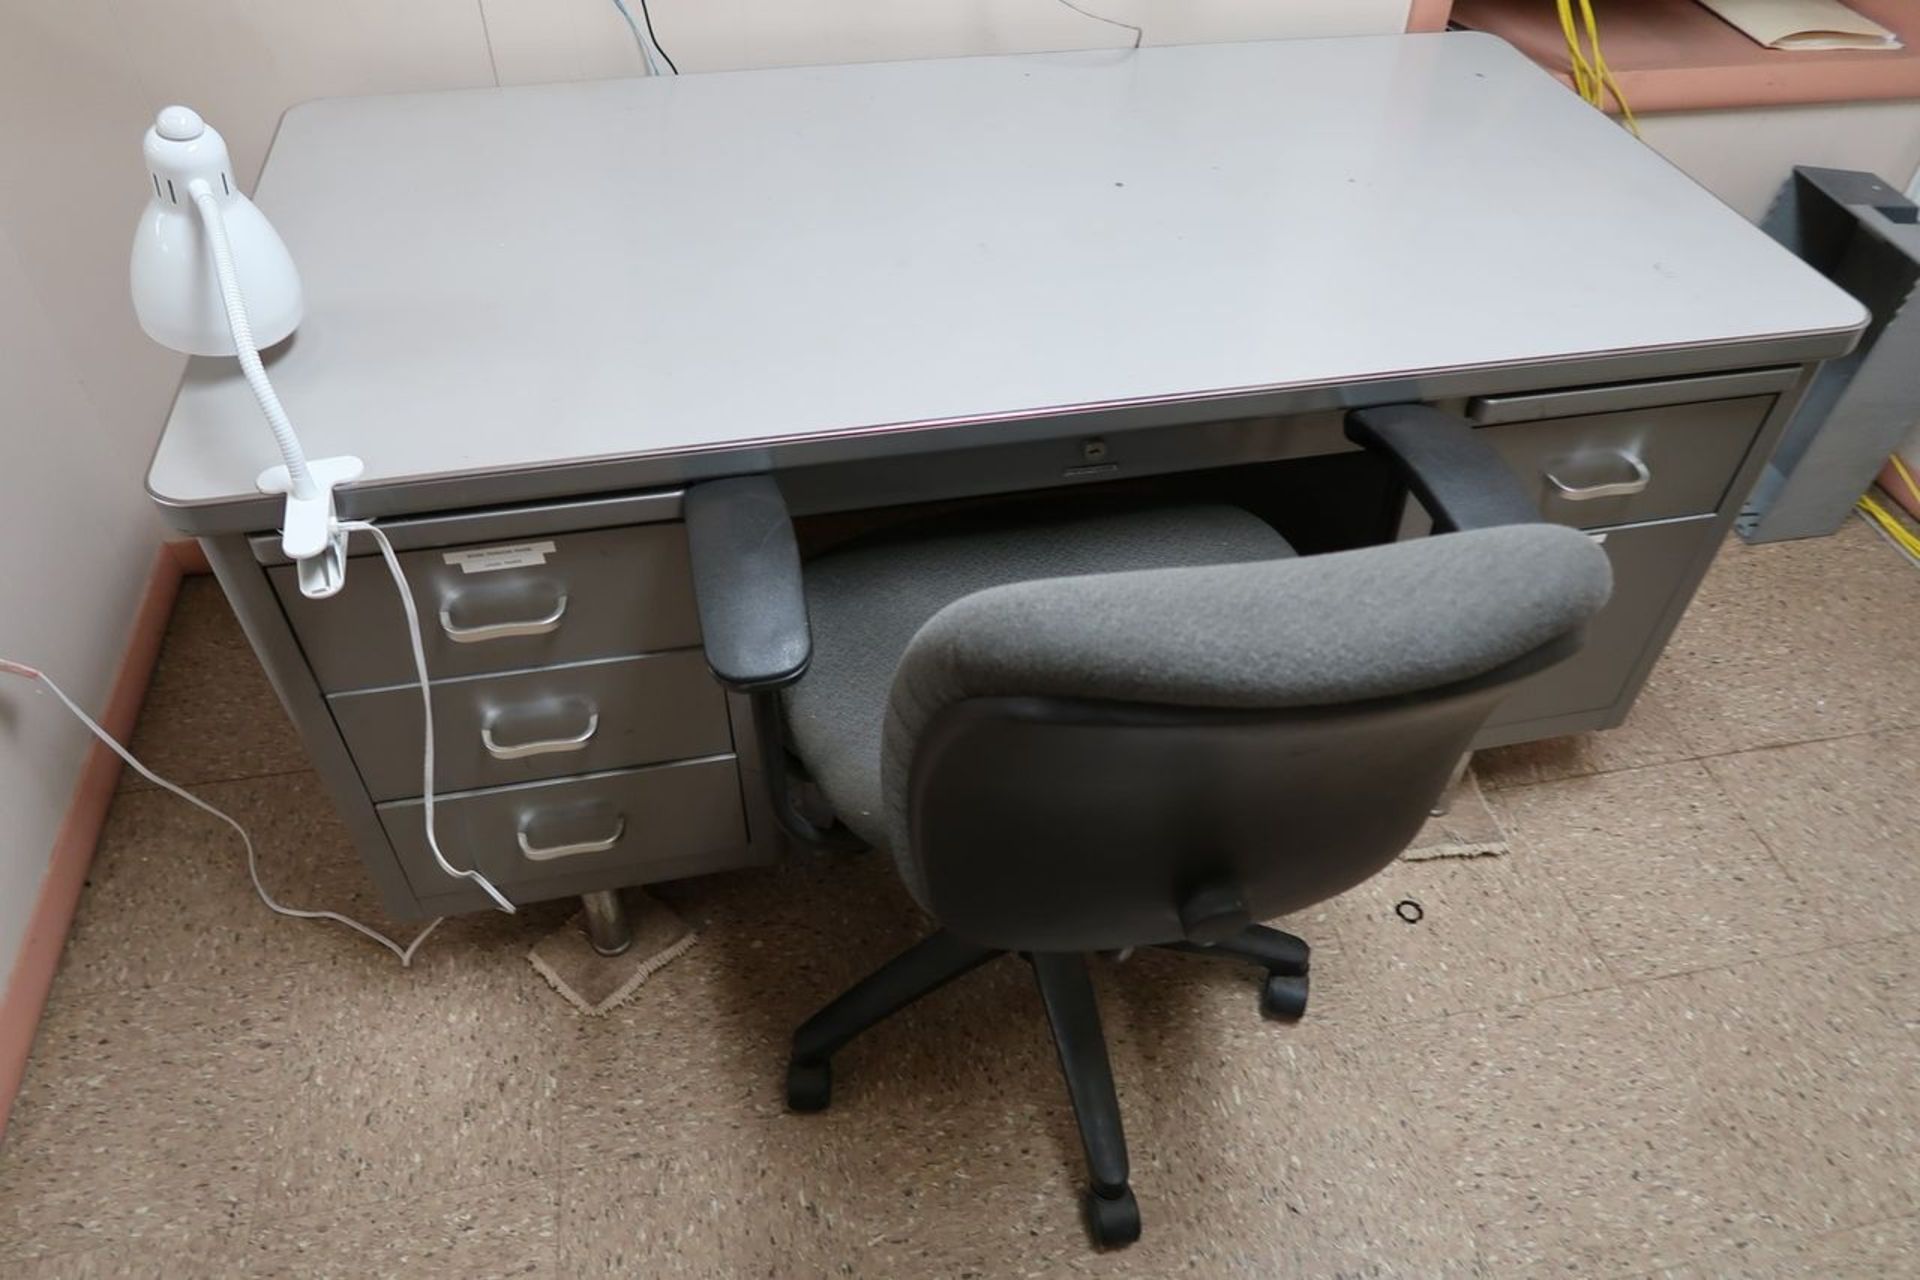 Lot - Office Furniture; (1) Desk, (1) Table, (1) Chair, (1) 3-Drawer Lateral Filing Cabinet, (